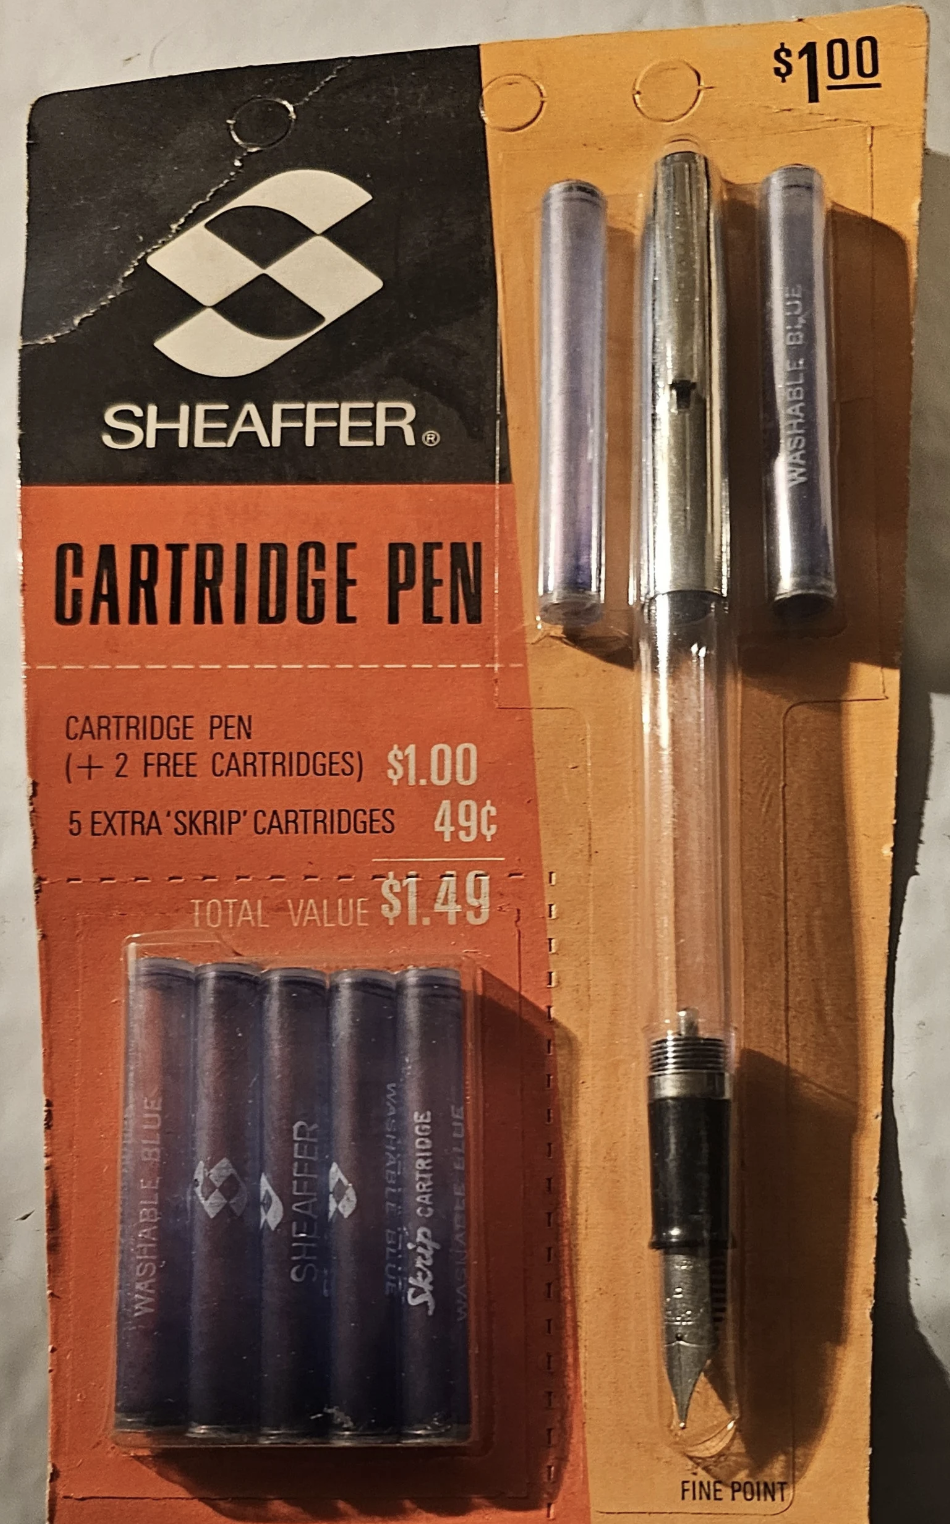 Vintage Sheaffer cartridge pen package labeled &quot;$1.00,&quot; includes one pen with two free and five extra &#x27;Skrip&#x27; cartridges valued at $1.49, featuring a fine point nib